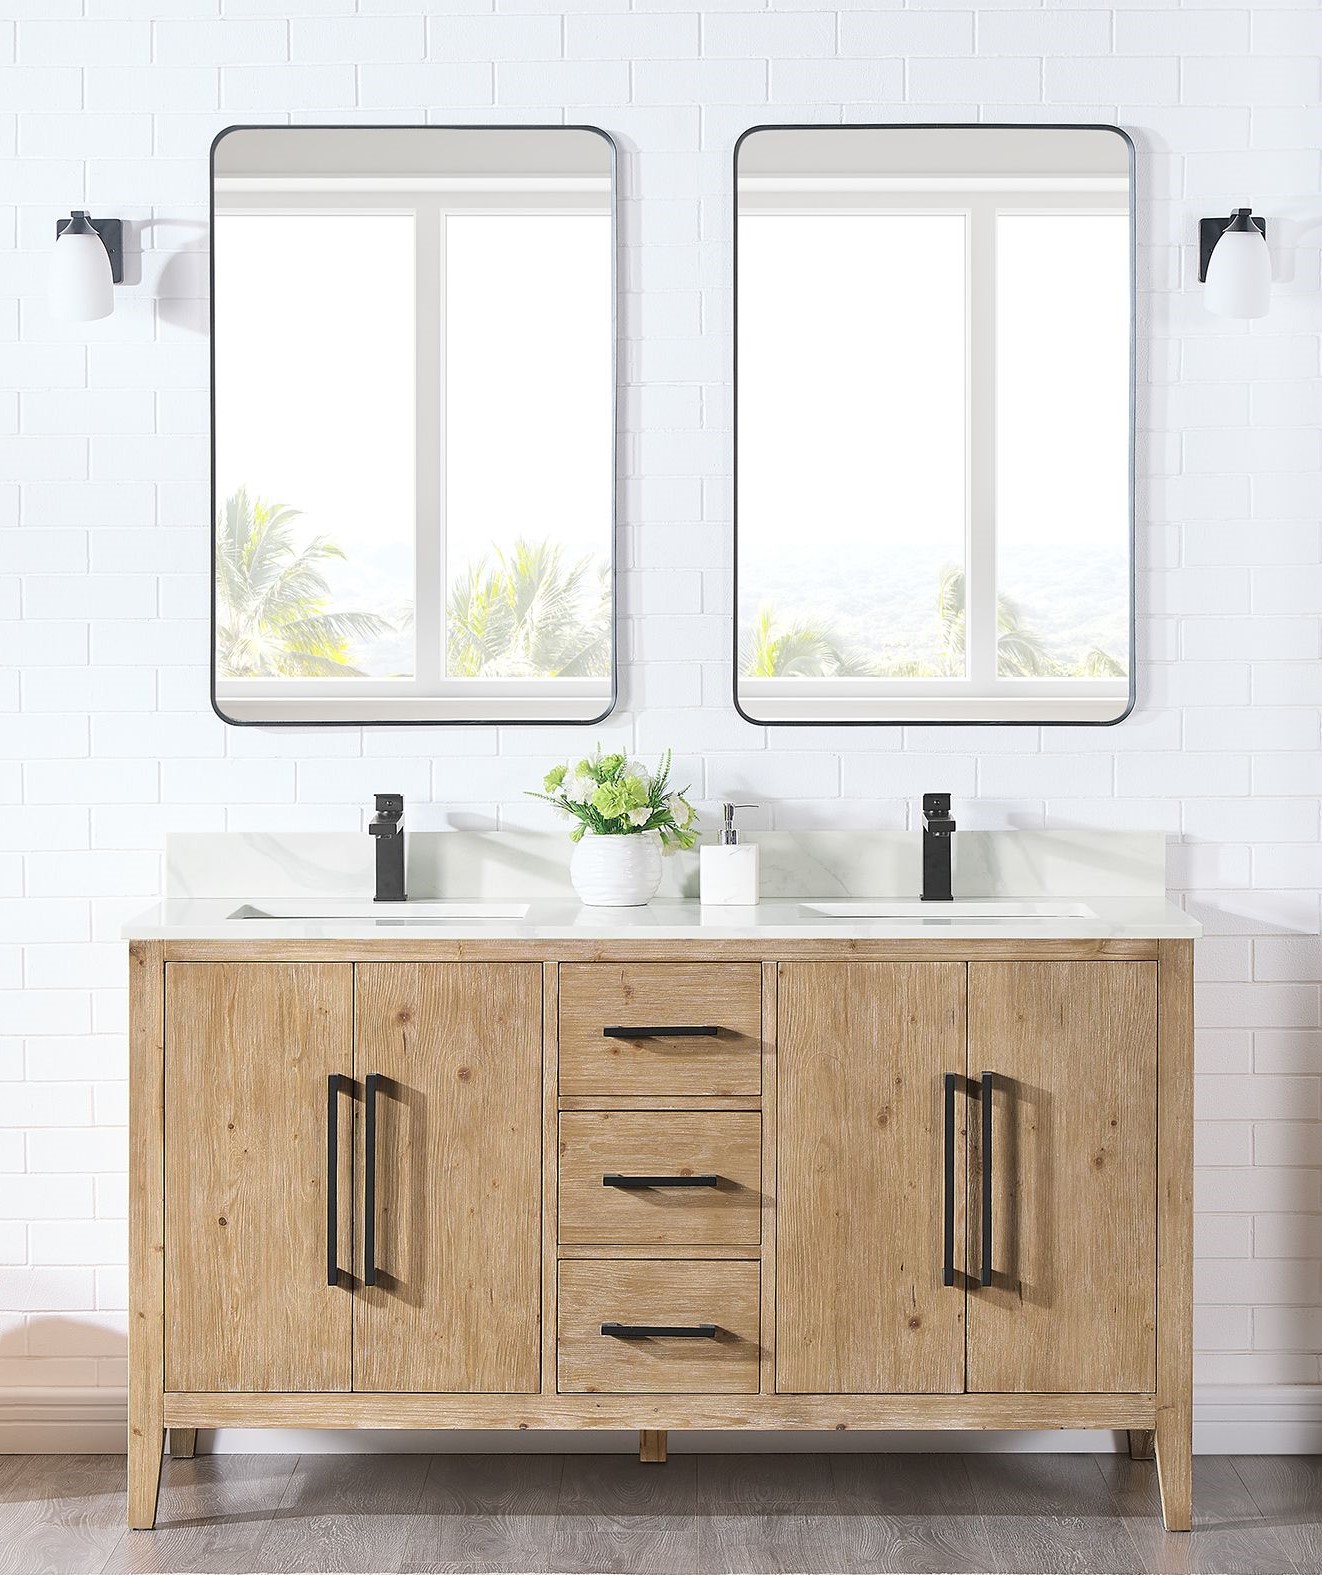 Issac Edwards 60" Double Bathroom Vanity in Weathered Fir with Calacatta White Quartz Stone Countertop